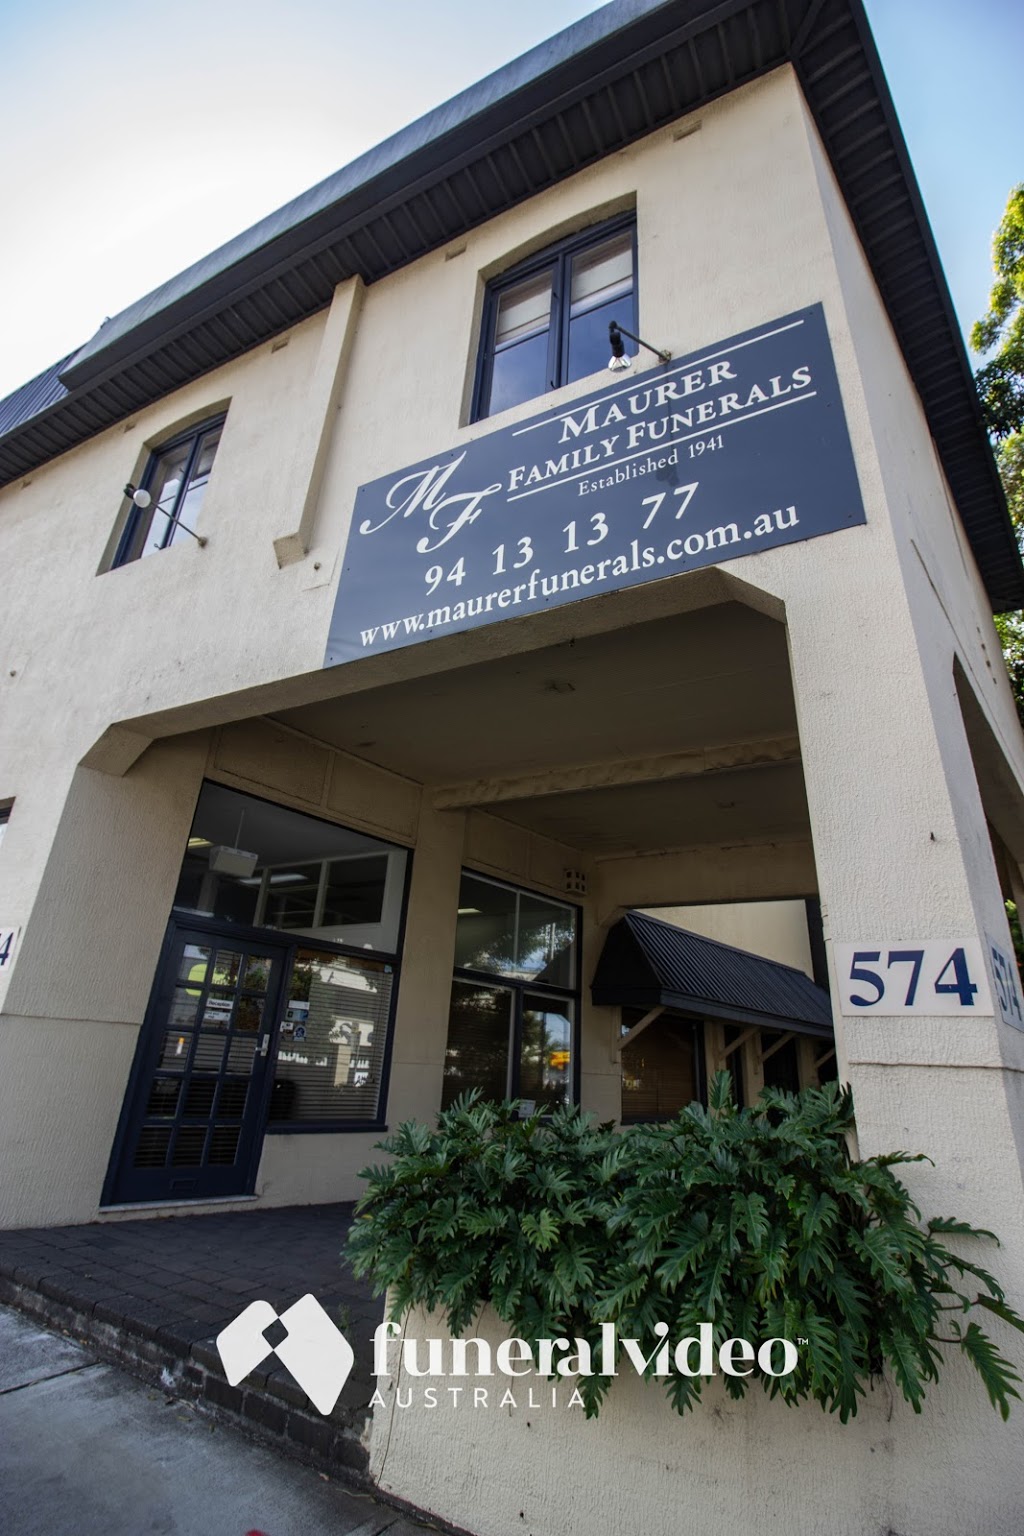 Maurer Family Funerals | funeral home | 574 Pacific Hwy, Chatswood NSW 2067, Australia | 0294131377 OR +61 2 9413 1377